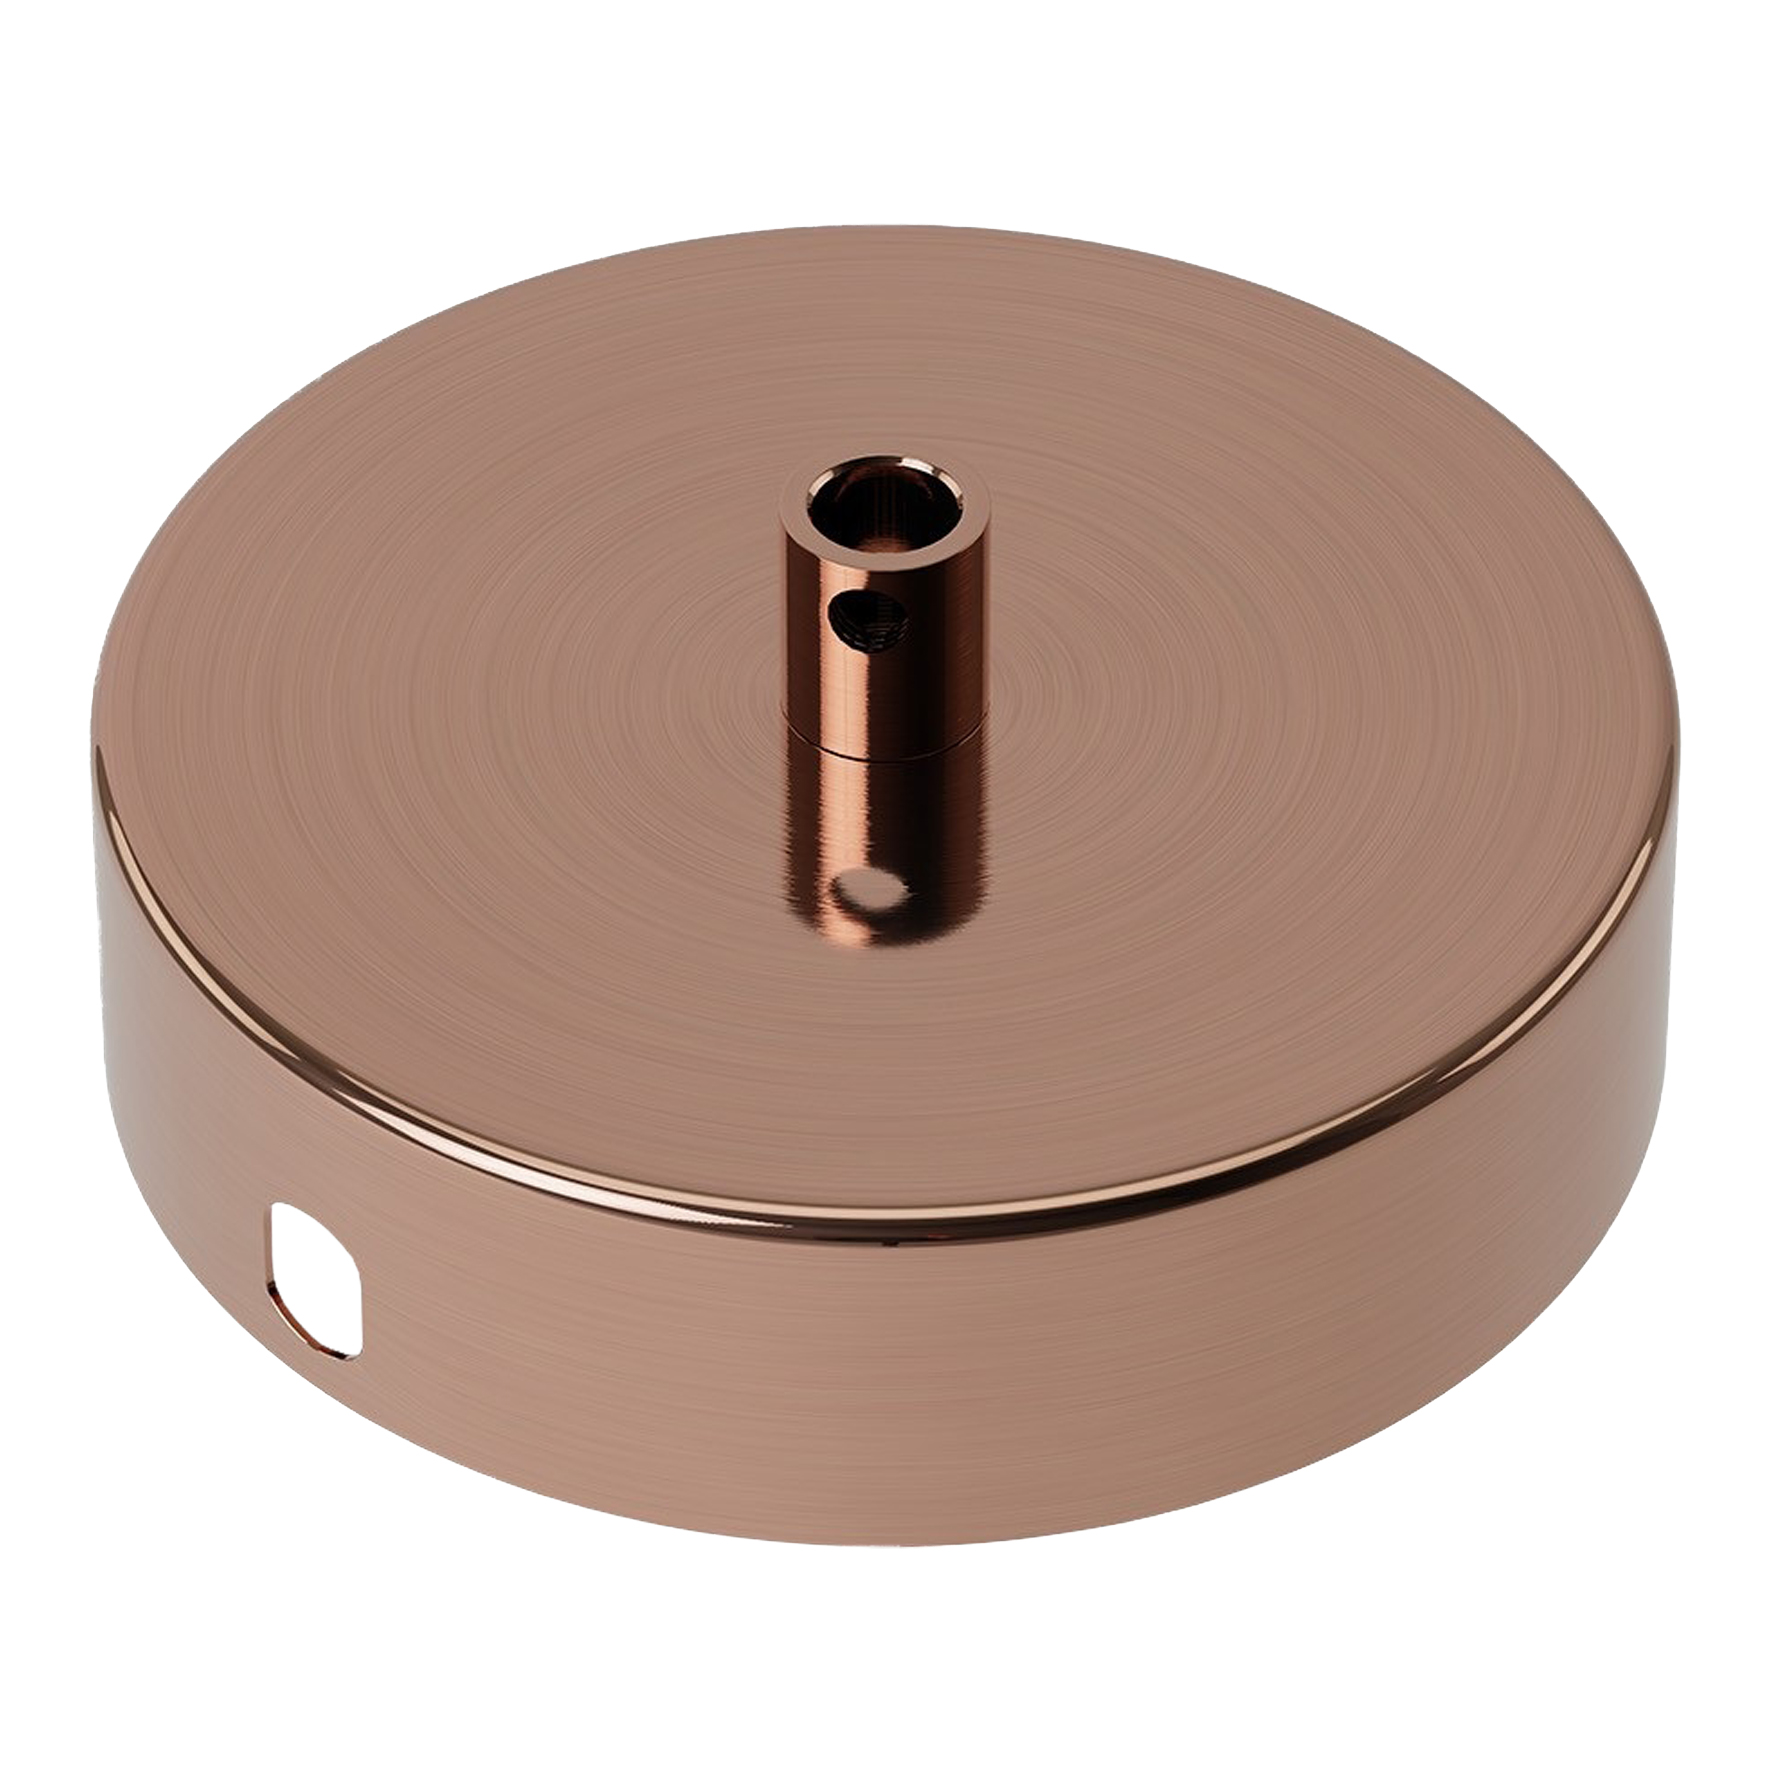 Ceiling Cup Metal Polished Copper 1 hole dia 100mm